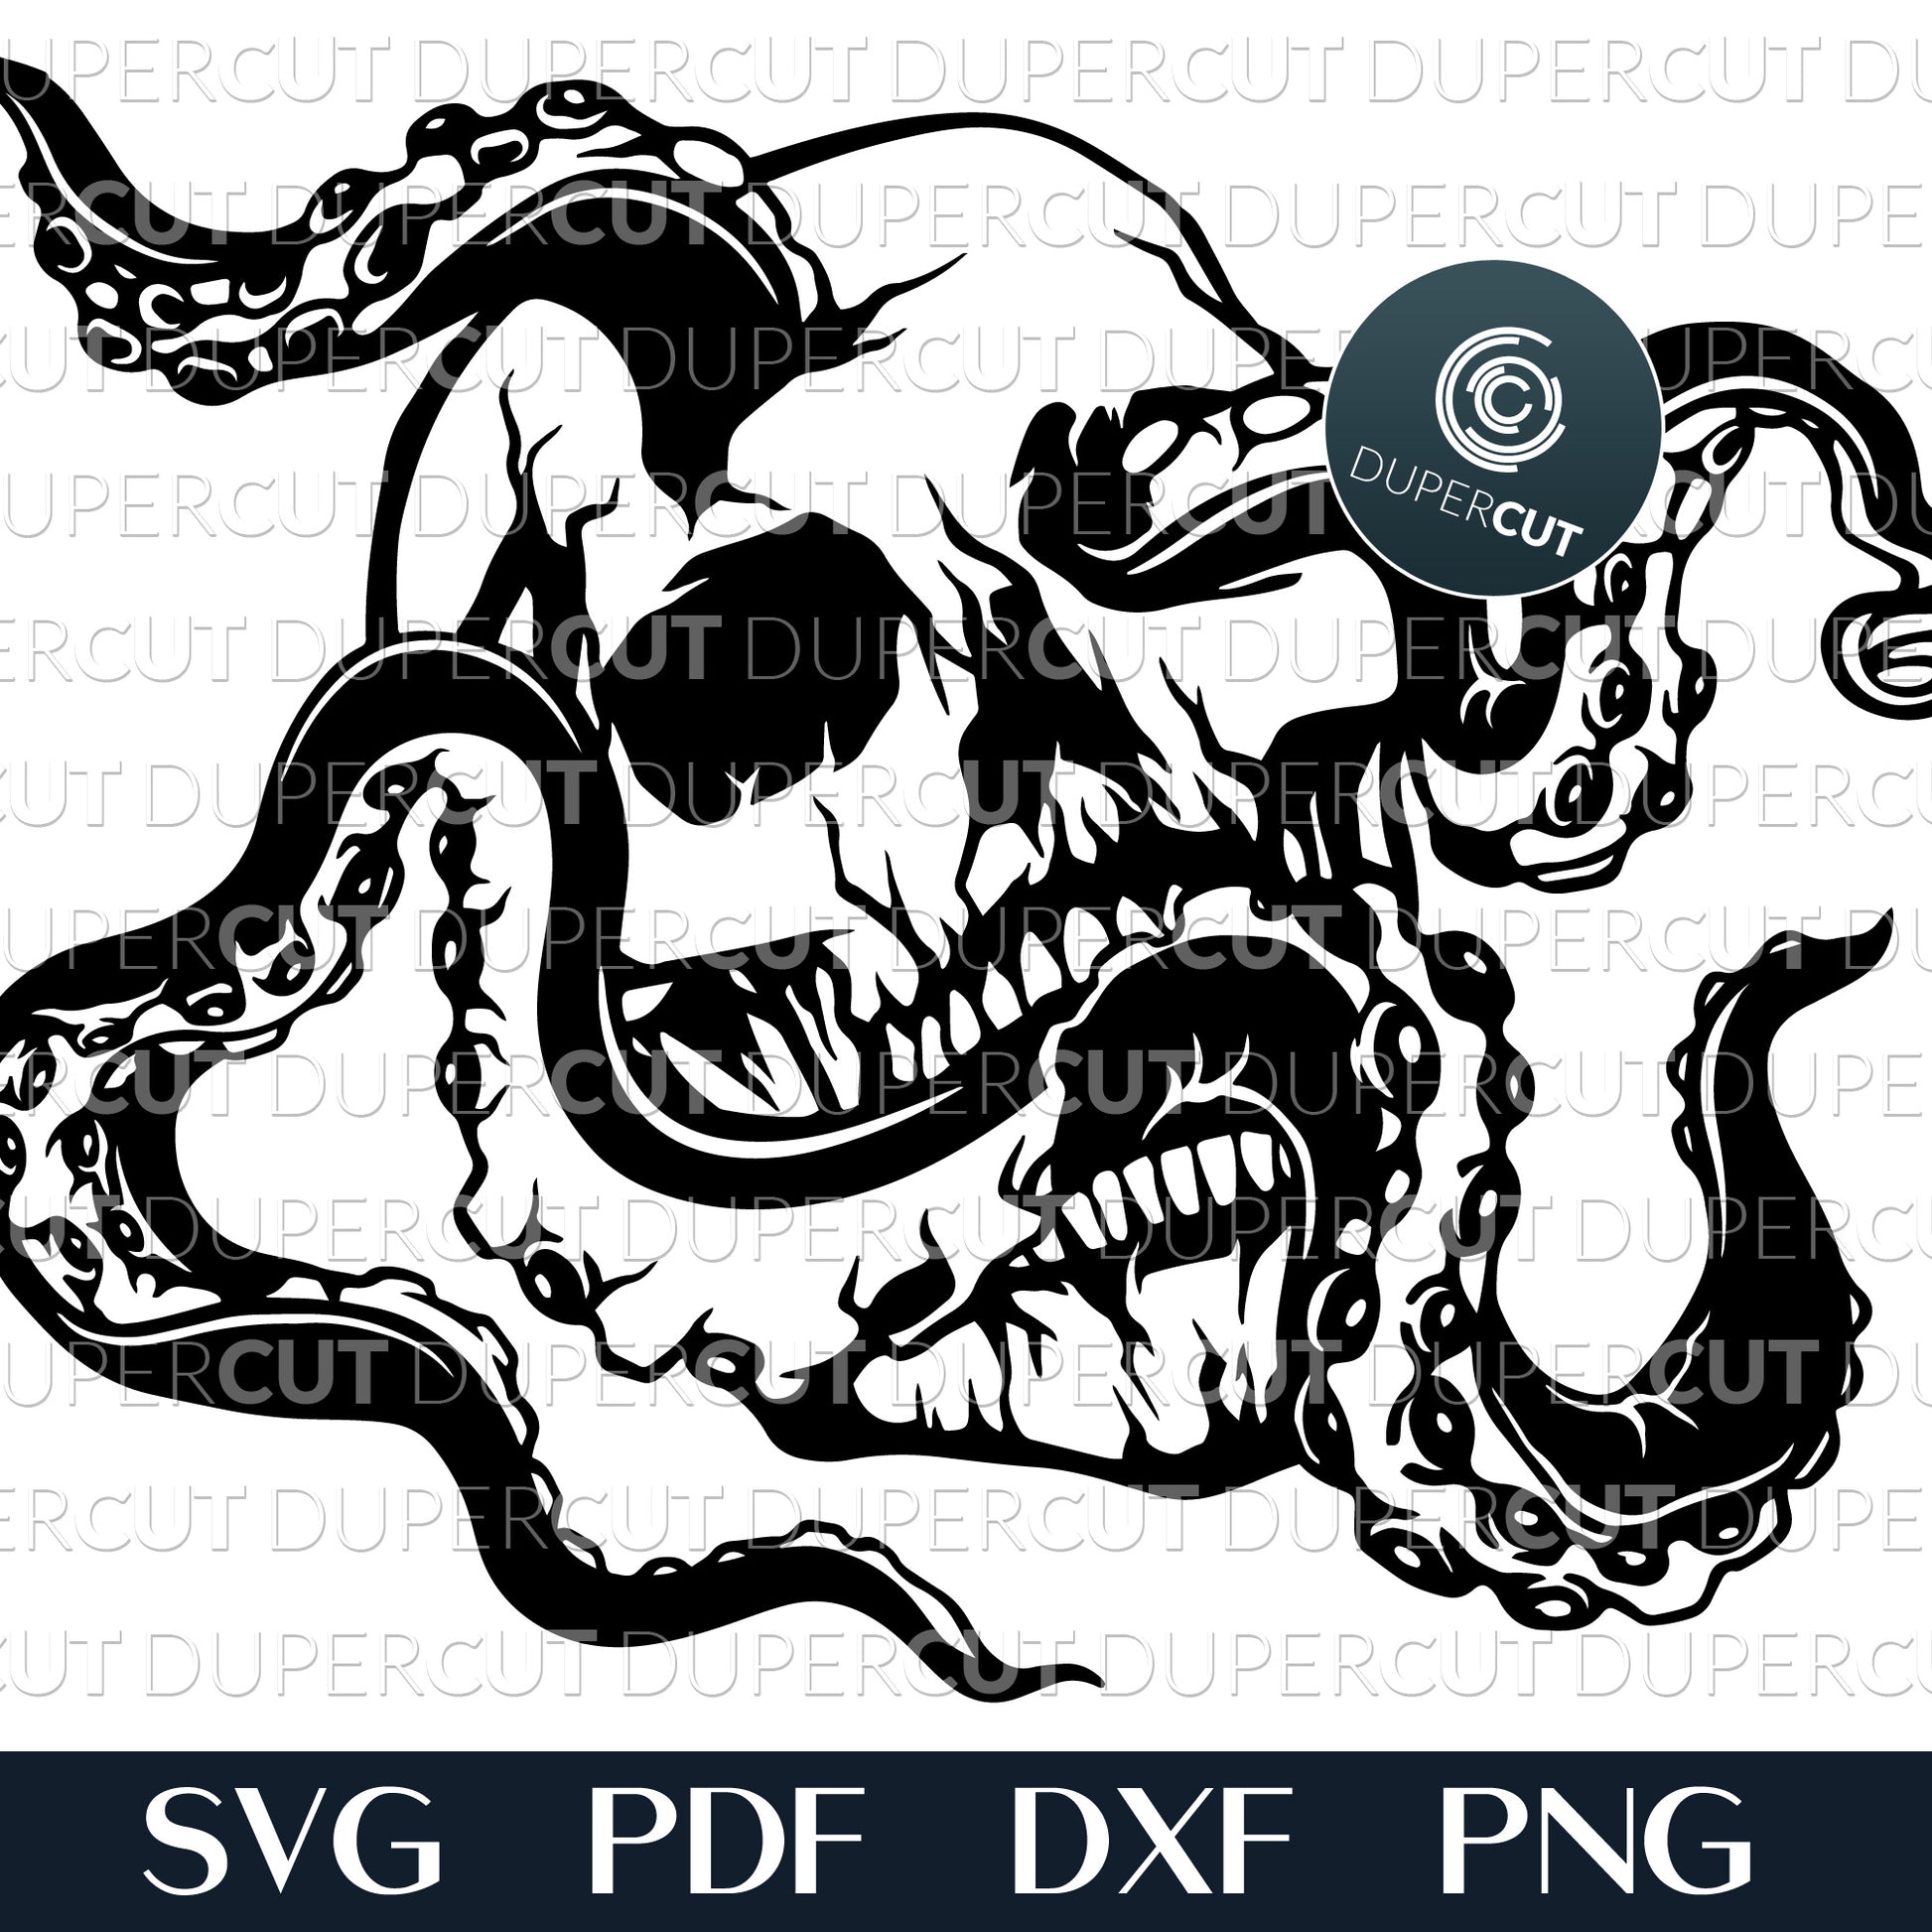 Octopus skull vector files - SVG DXF PNG cutting template for Cricut, Silhouette, laser engraving, sublimation, t-shirt application.